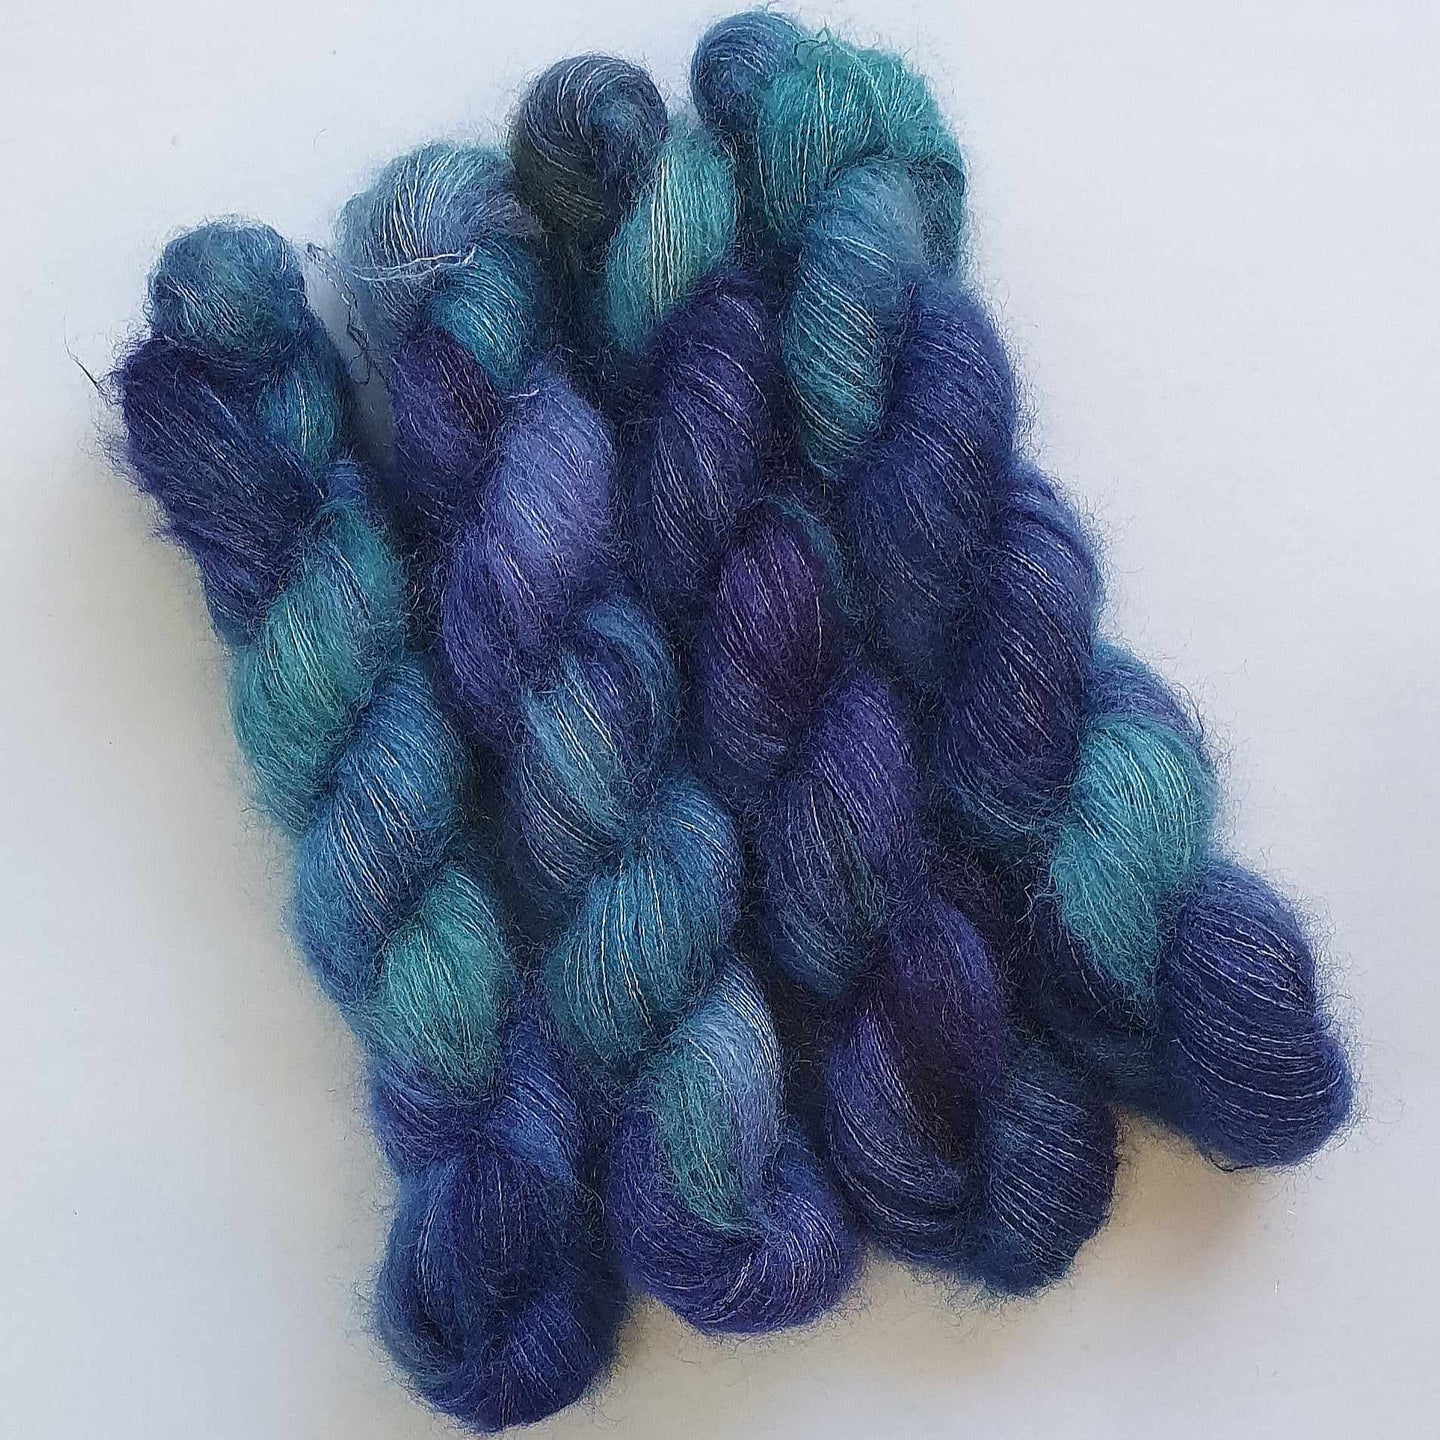 Tributary (Sylph Lace 2ply - Kid Mohair/Mulberry Silk)